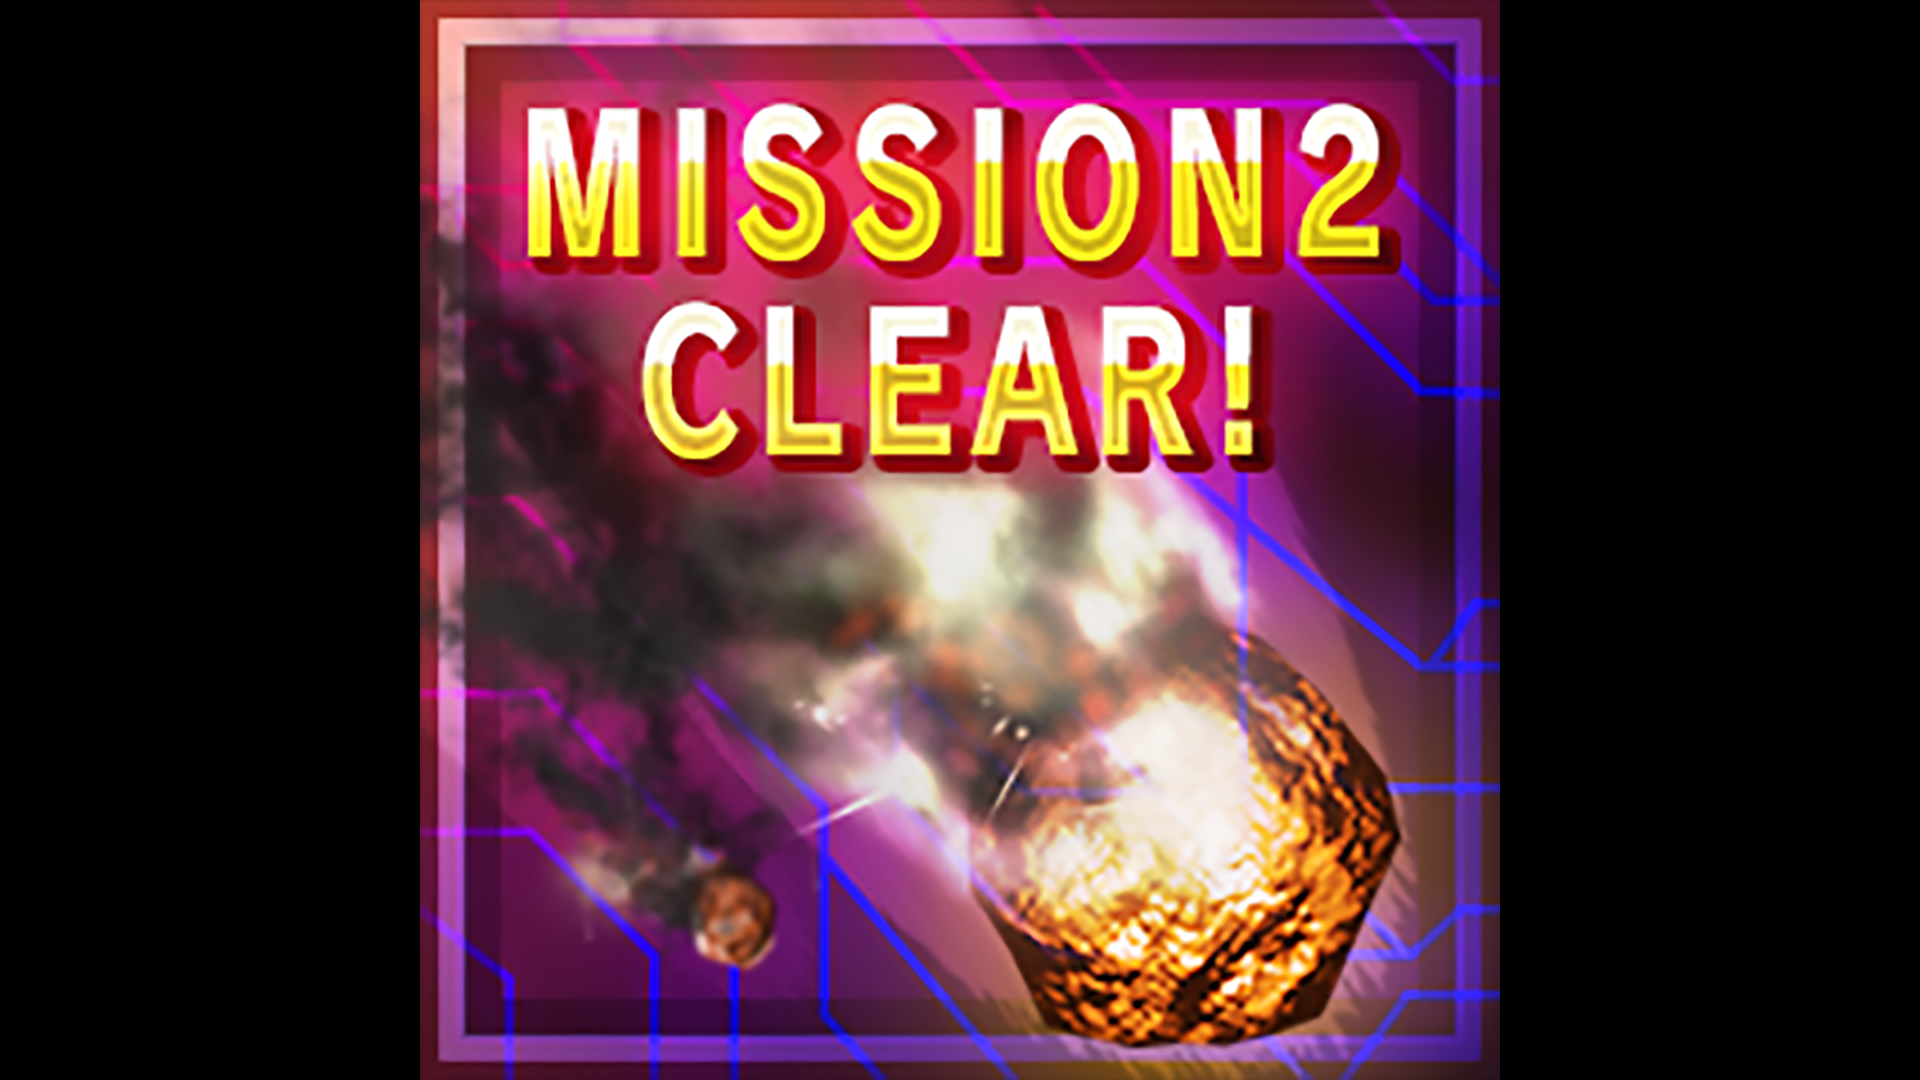 Icon for Special Mission 2 "Meteorite Breaker!"